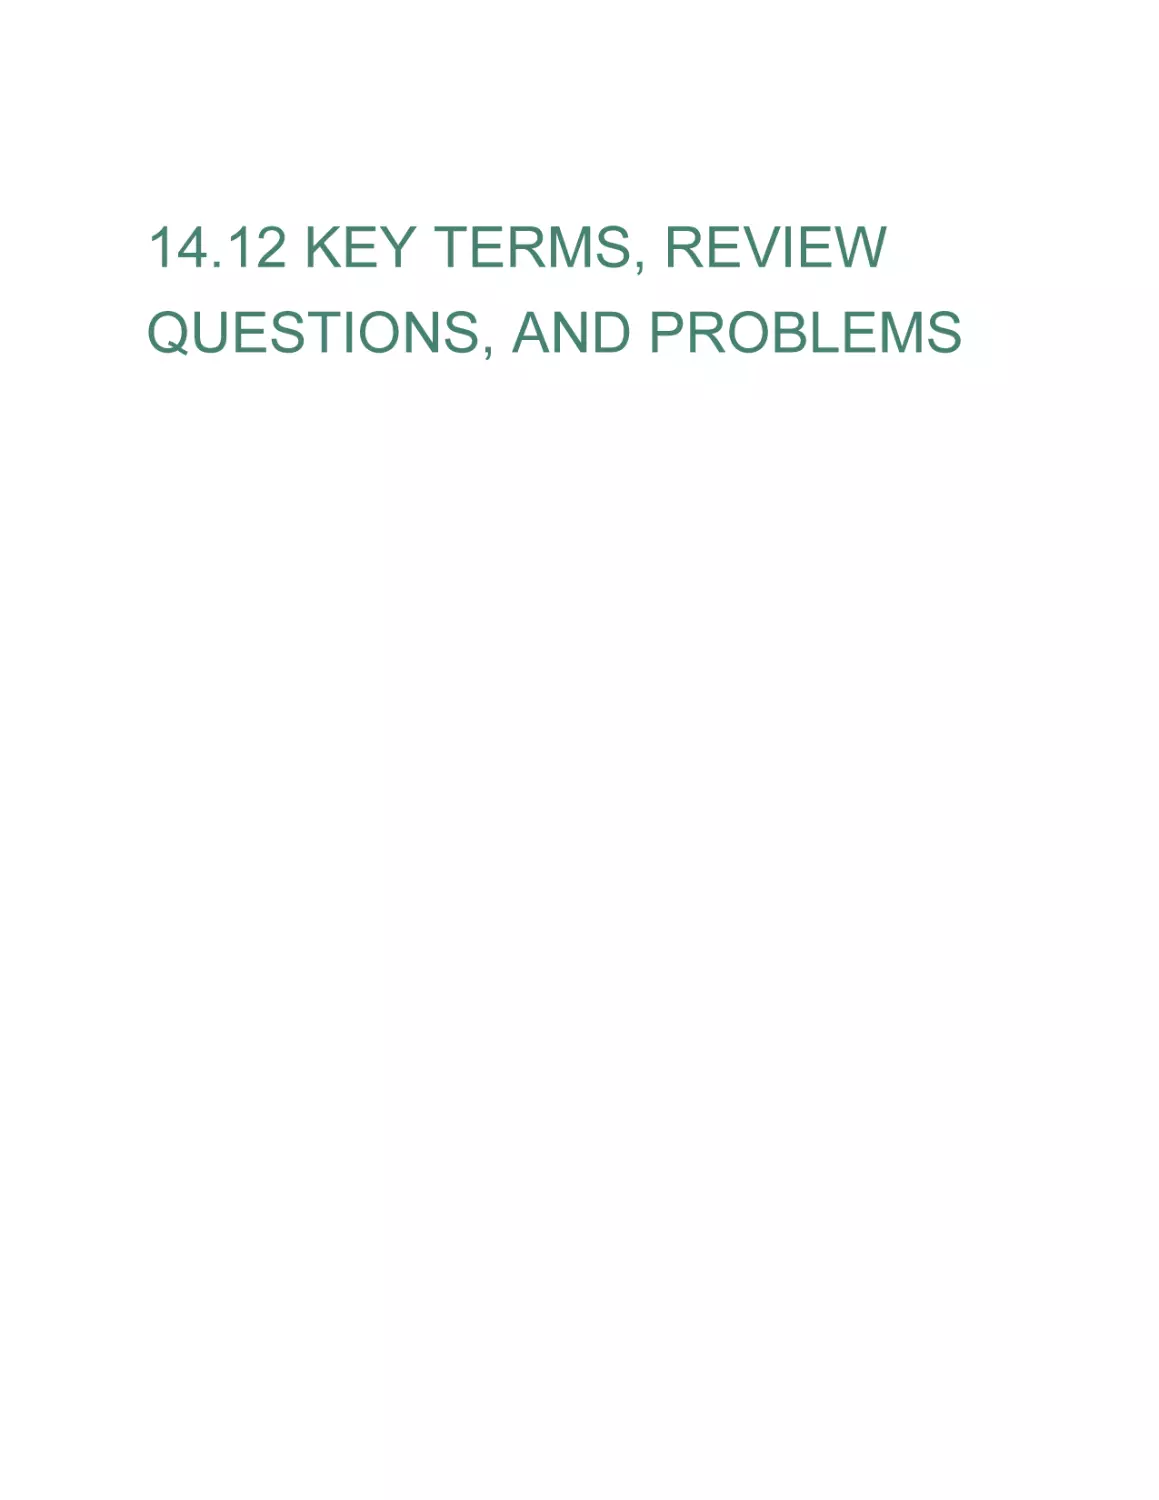 14.12 KEY TERMS, REVIEW QUESTIONS, AND PROBLEMS